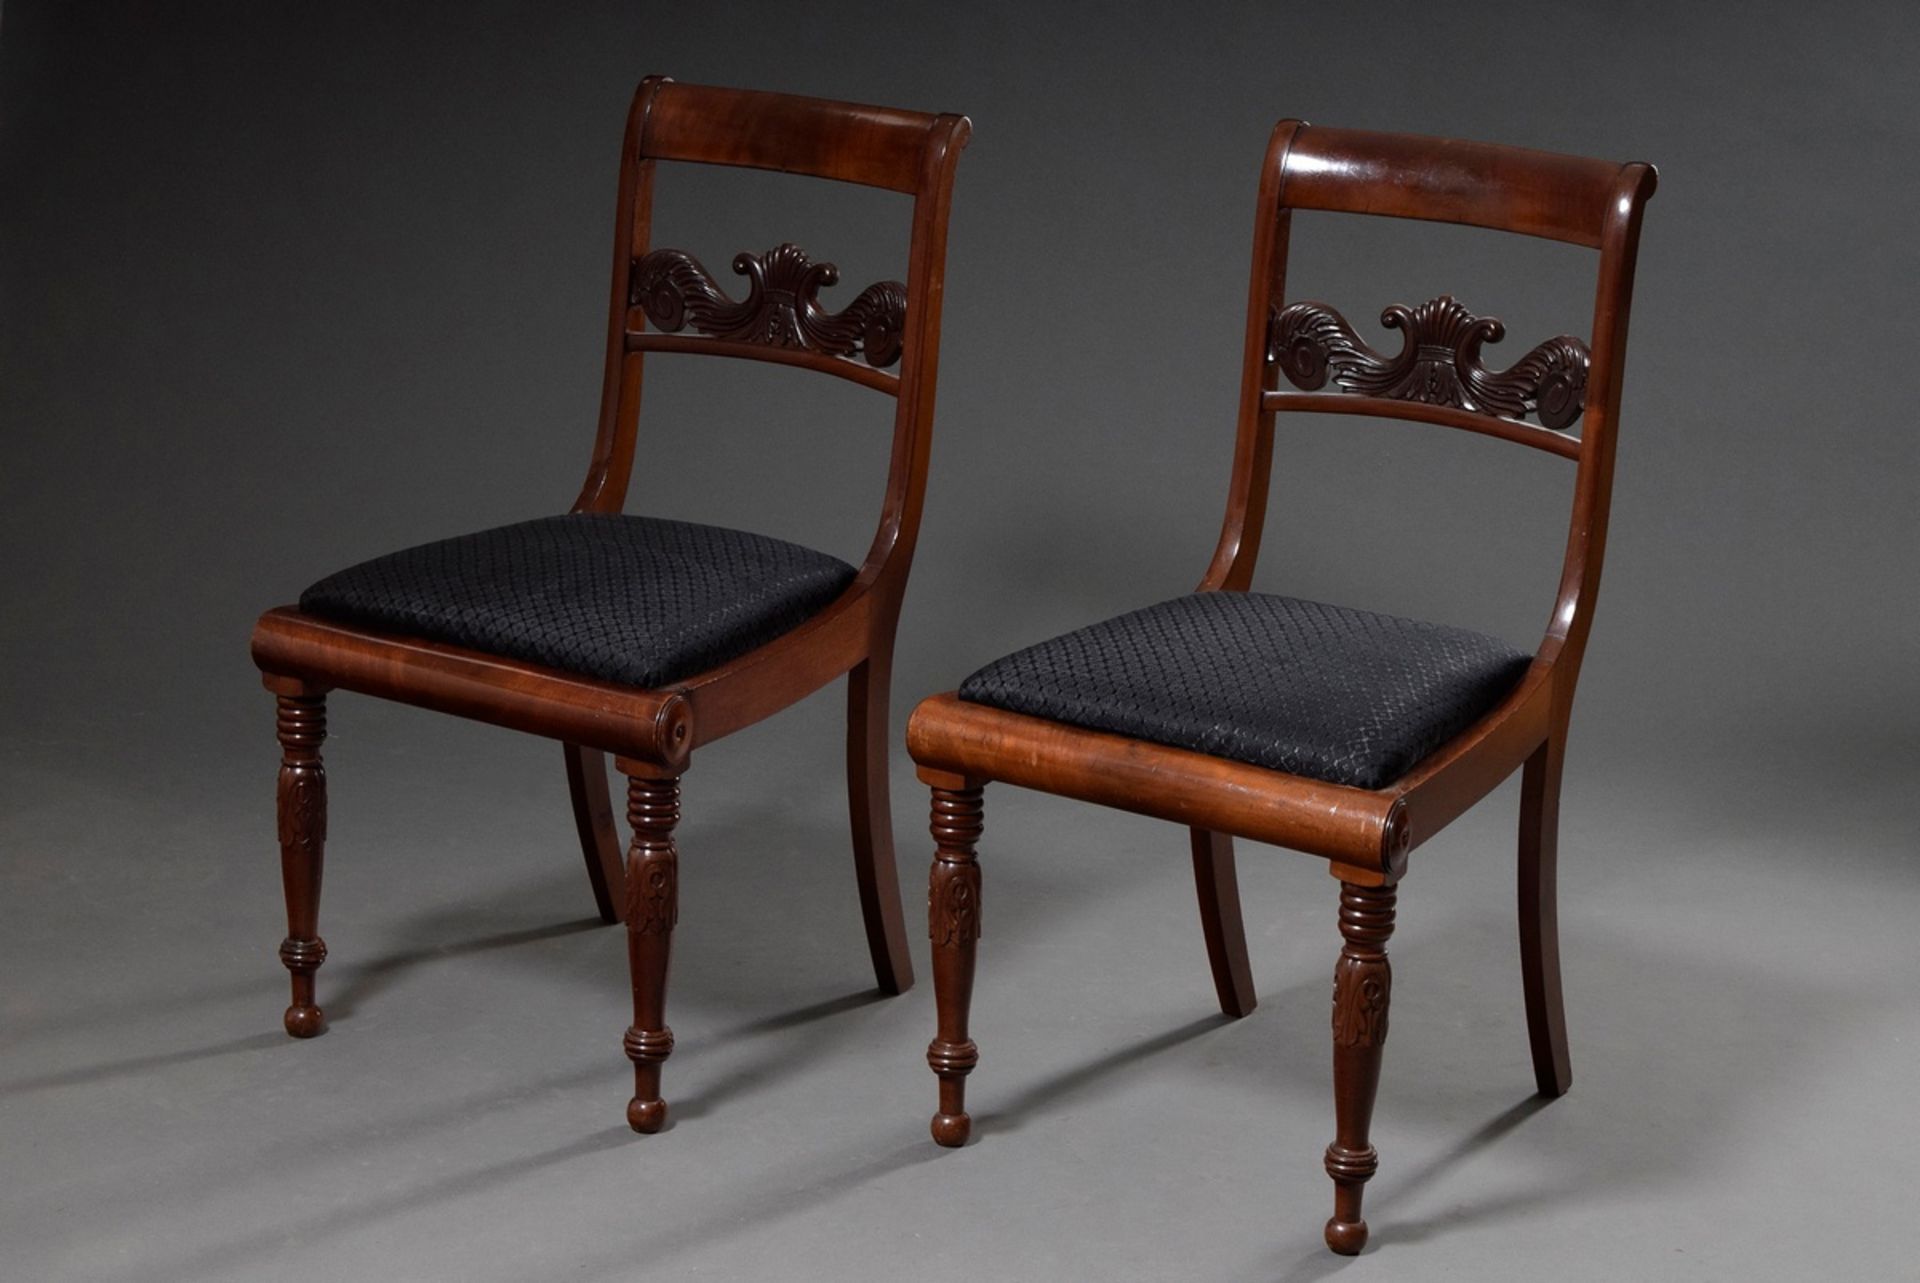 Pair of Biedermeier chairs with floral carved back board, turned legs and horsehair upholstery, mah